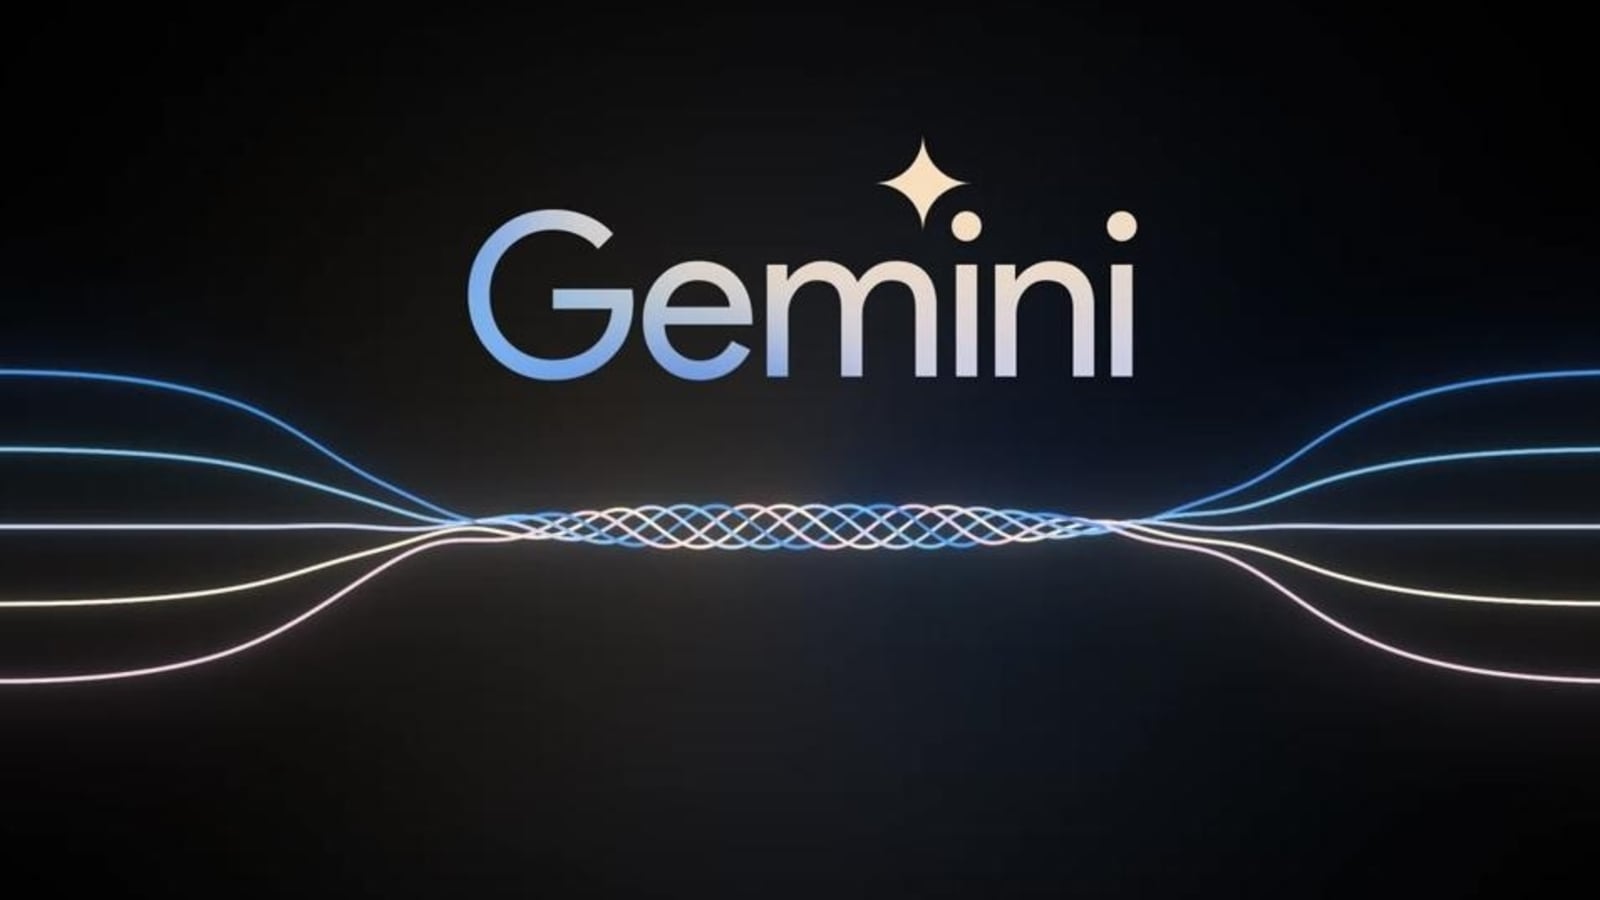 Google Gemini’s flawed AI racial visuals discovered as warning of tech titans’ capability